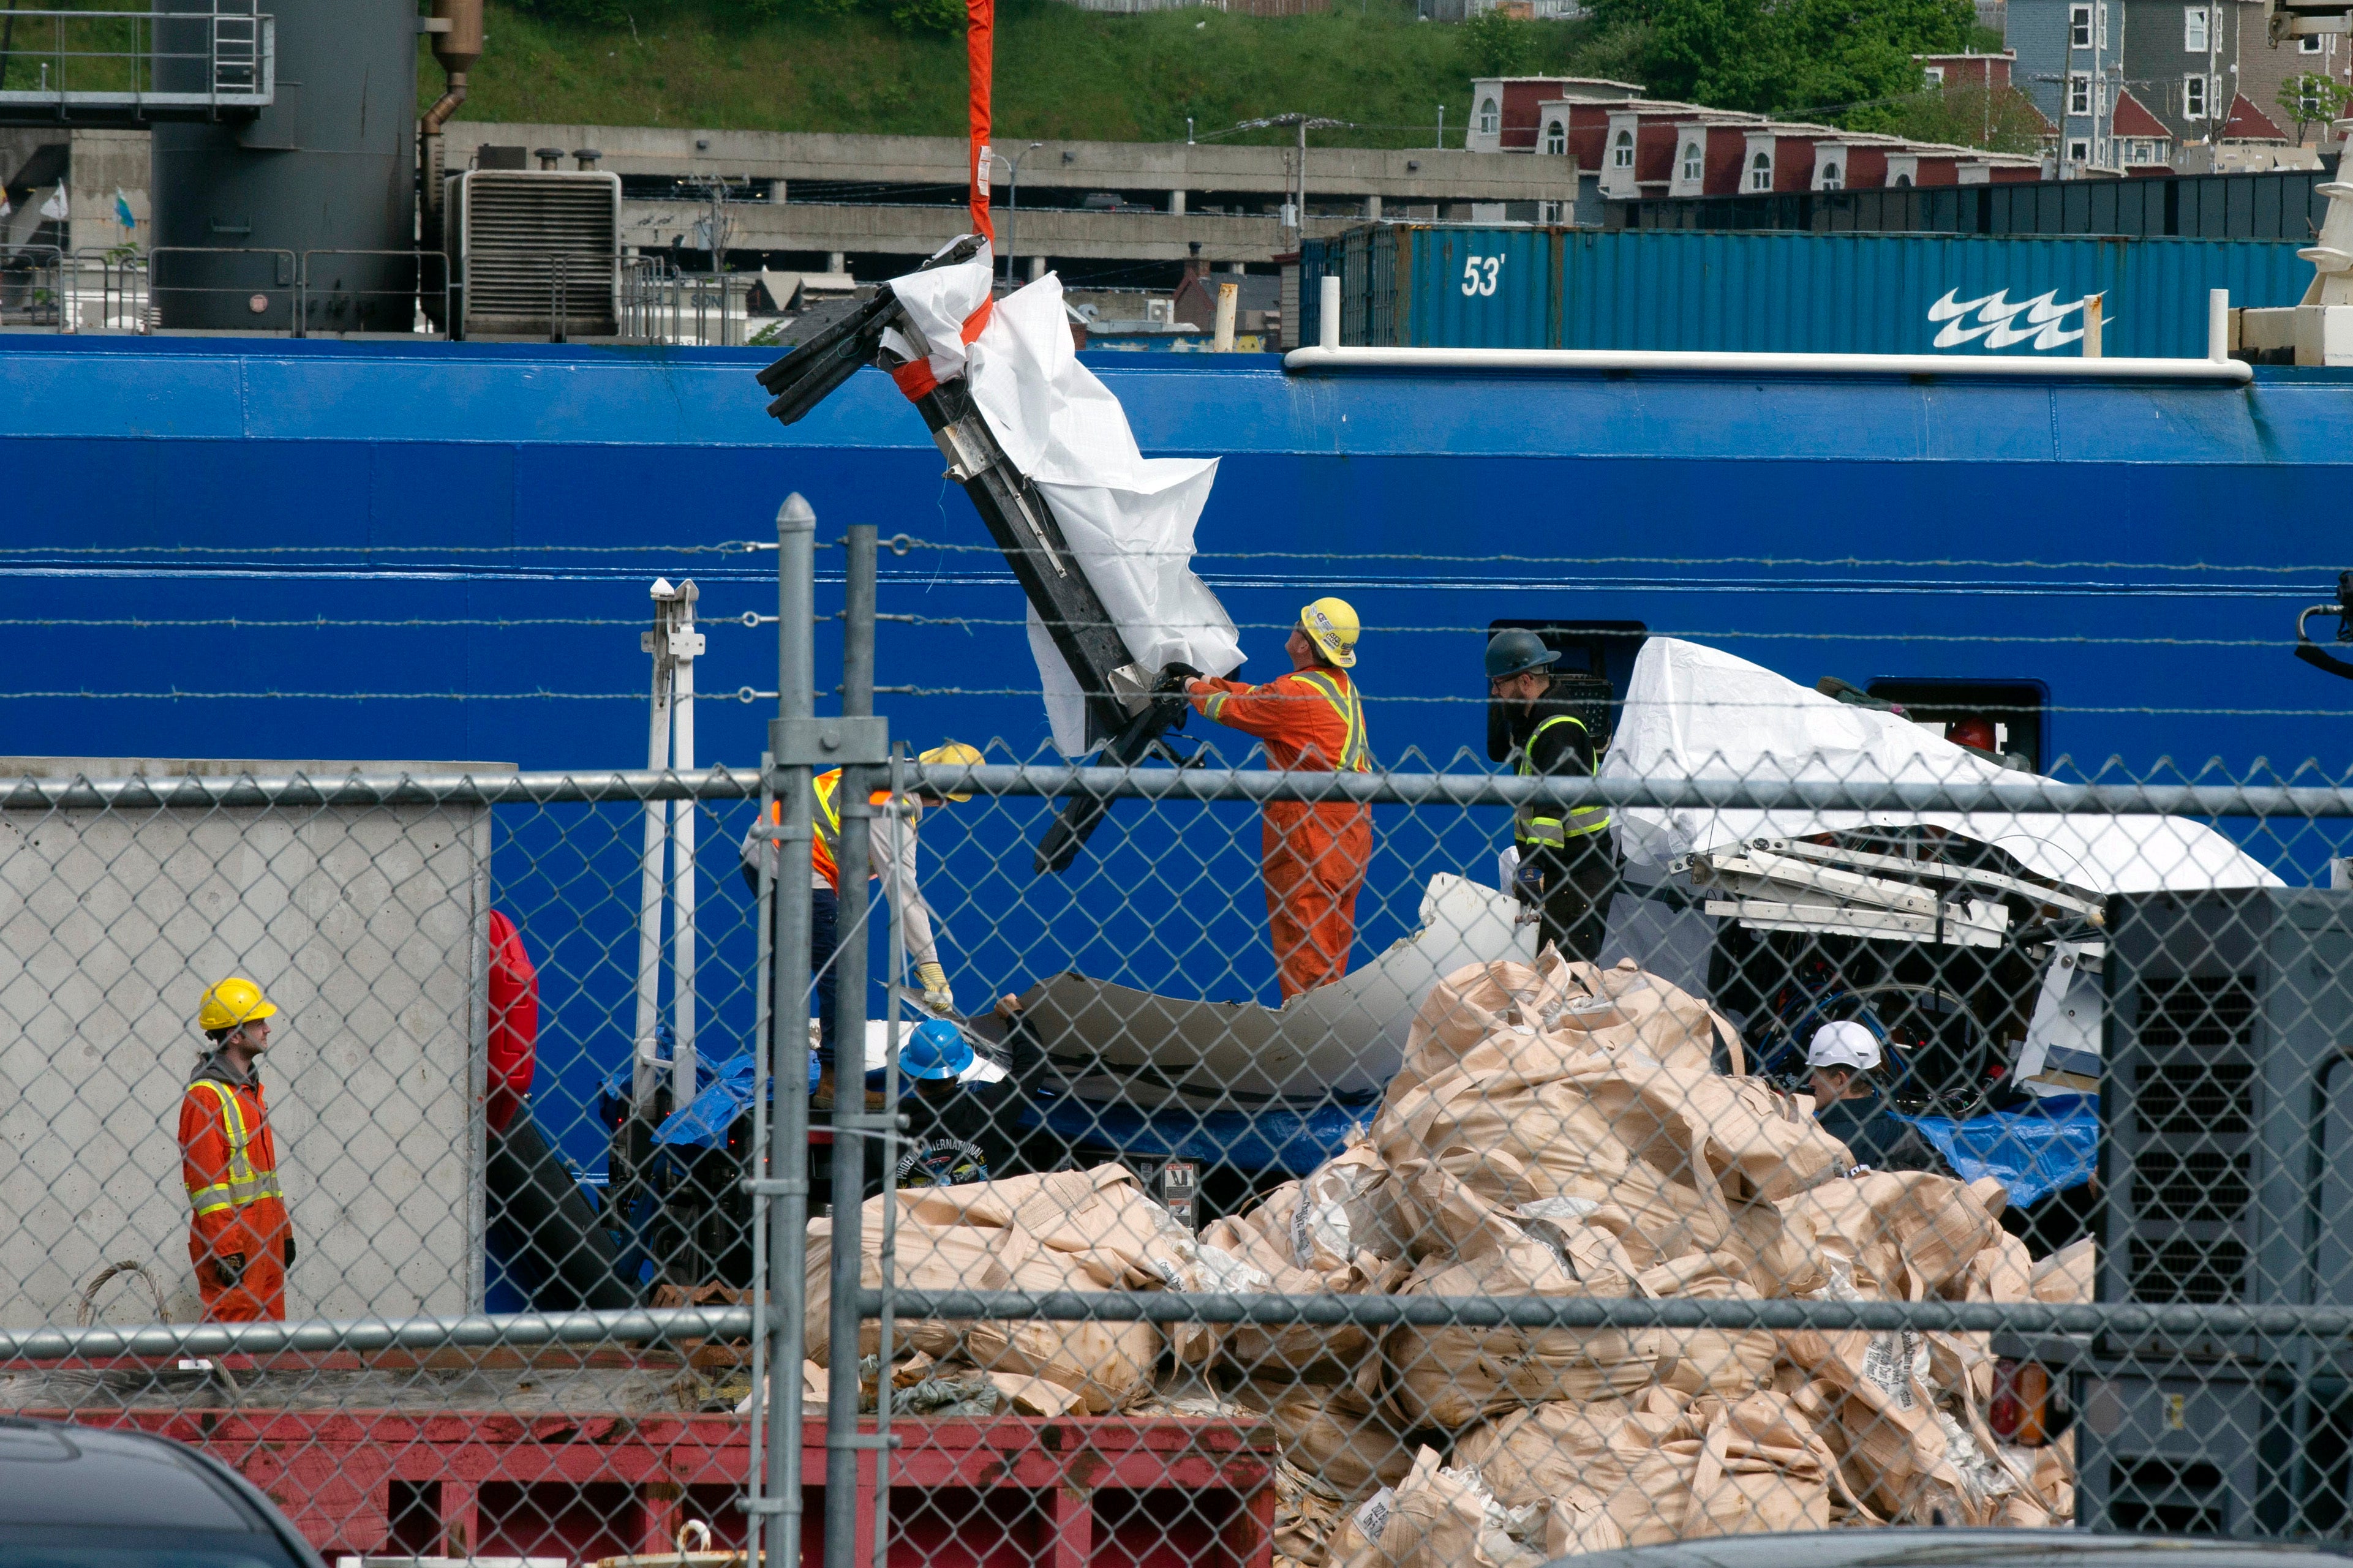 Photos shared by the Associated Press showed what appeared to be several pieces covered with white tarps being unloaded from the American ships Sycamore and Horizon Arctic at a port in St John’s, Newfoundland.